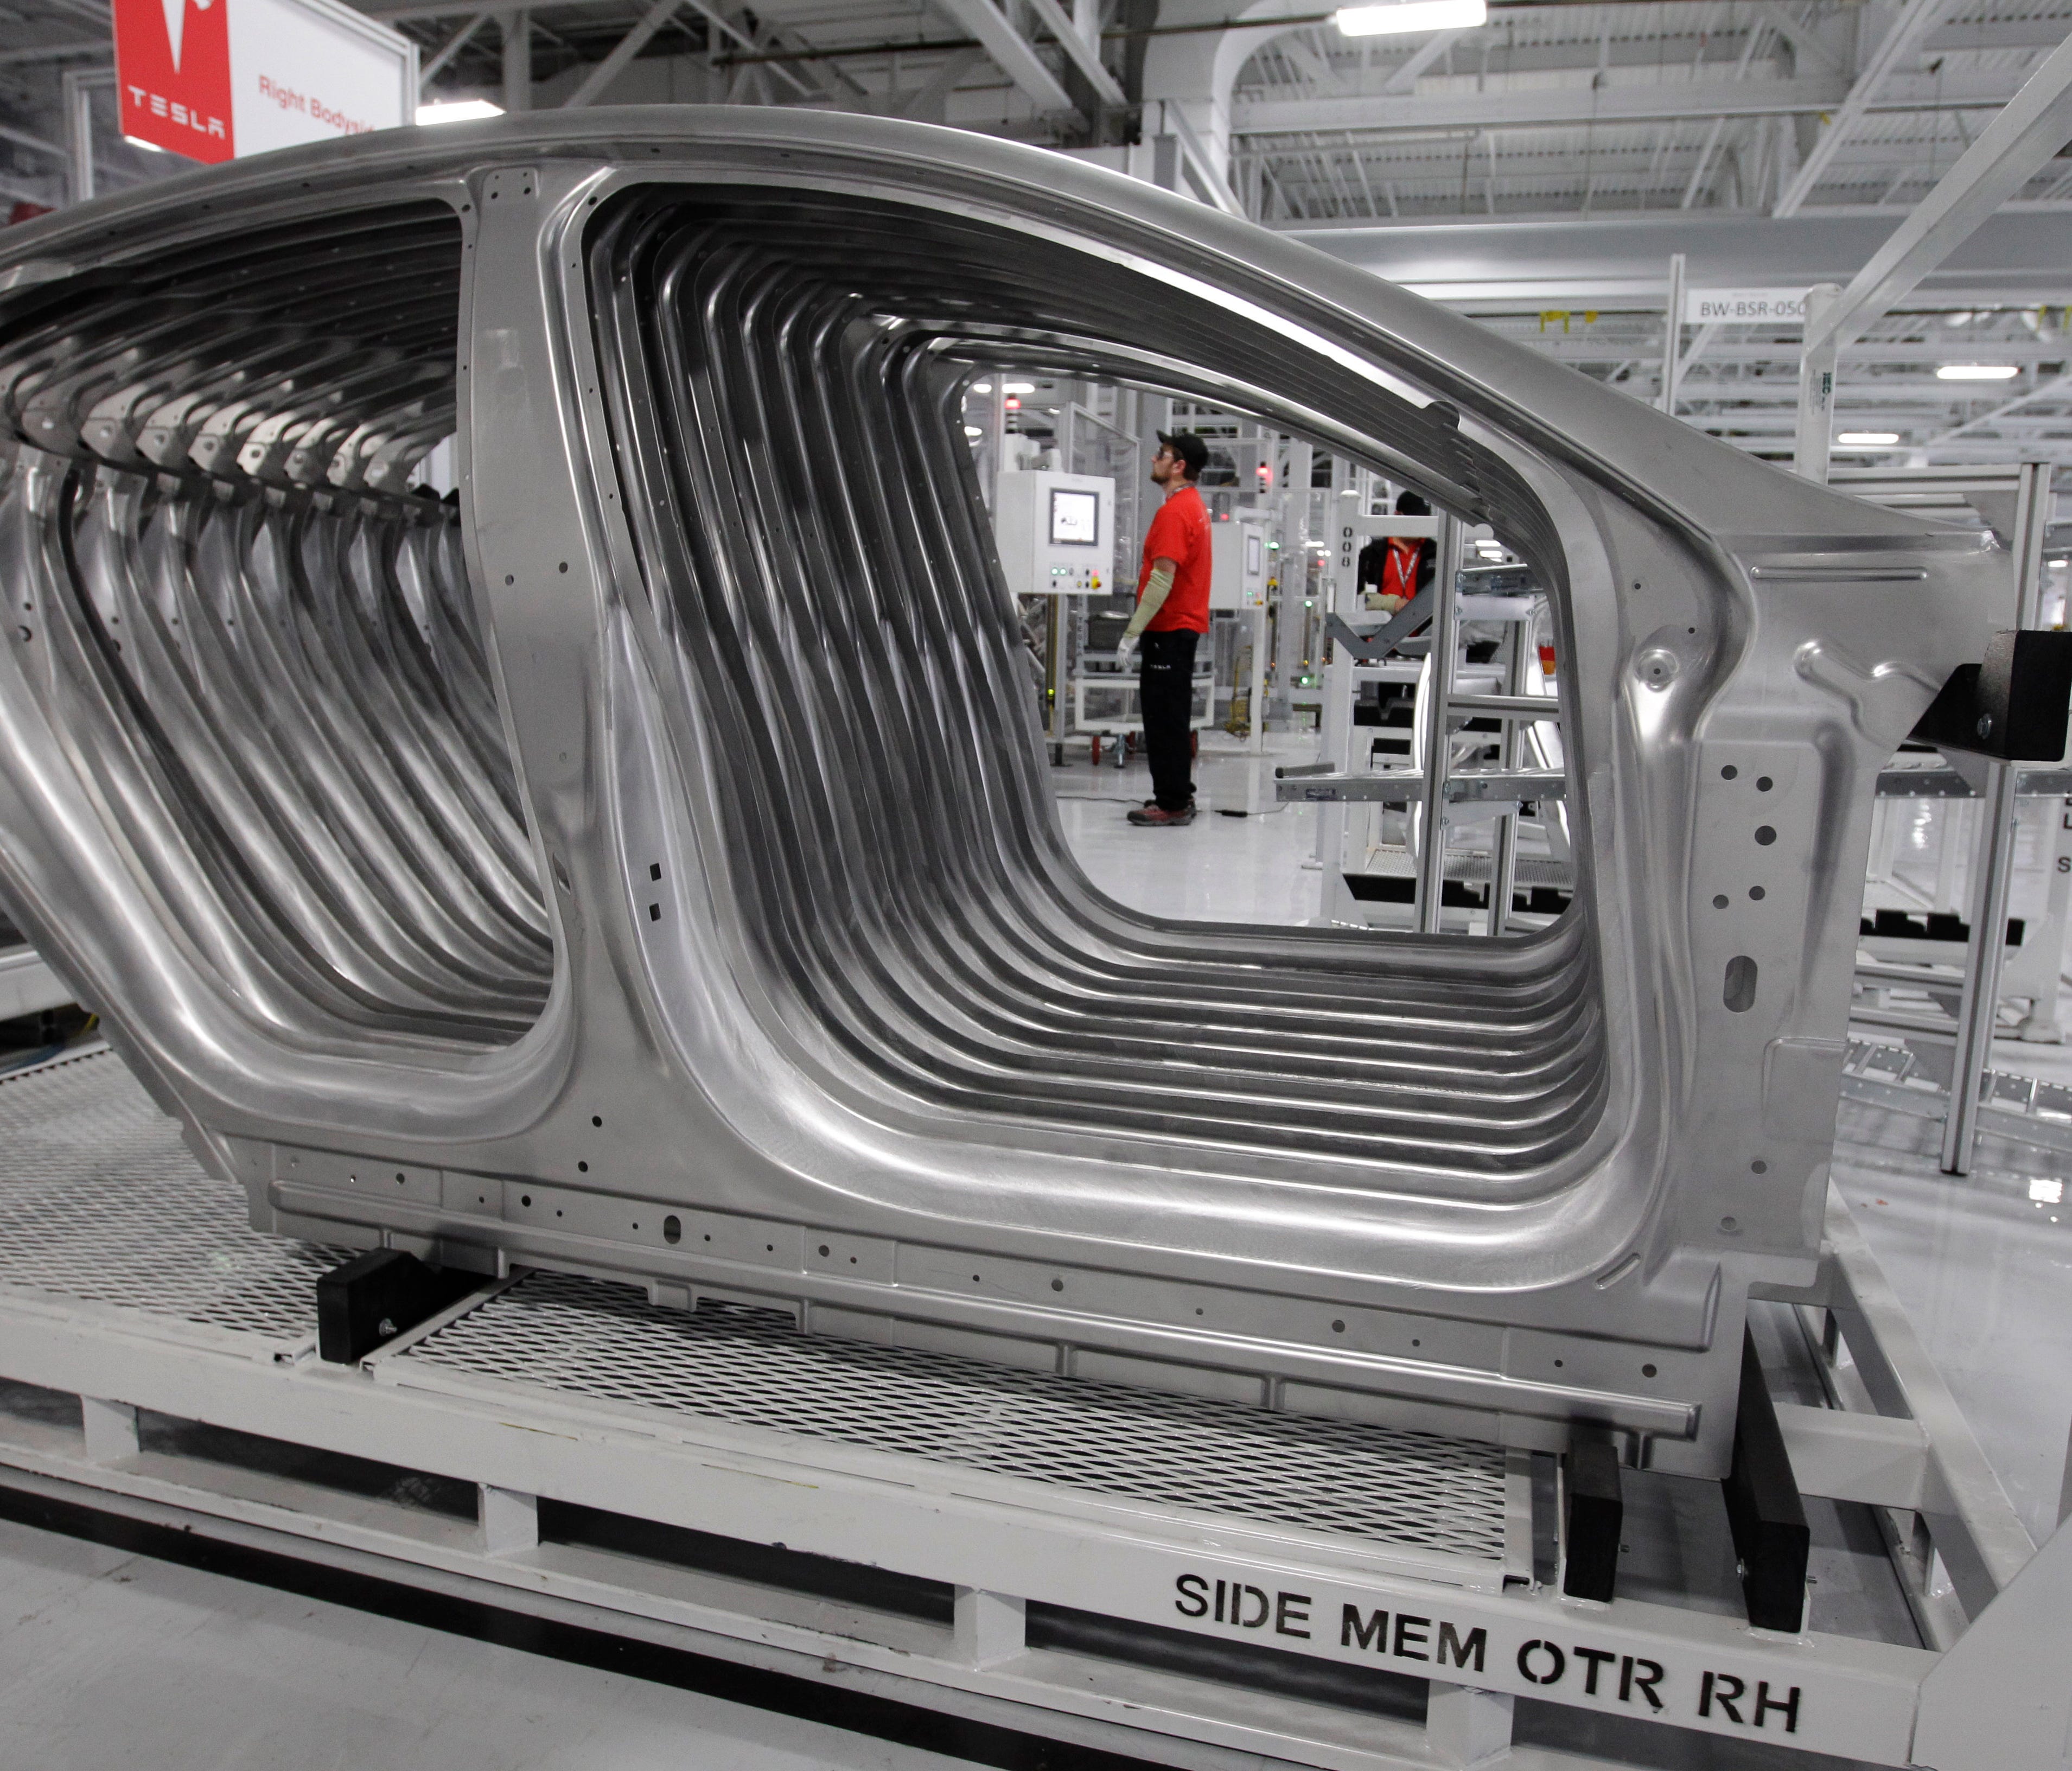 Tesla Model S frames are shown in the assembly area at the Tesla factory in Fremont, Calif., on June 22, 2012.